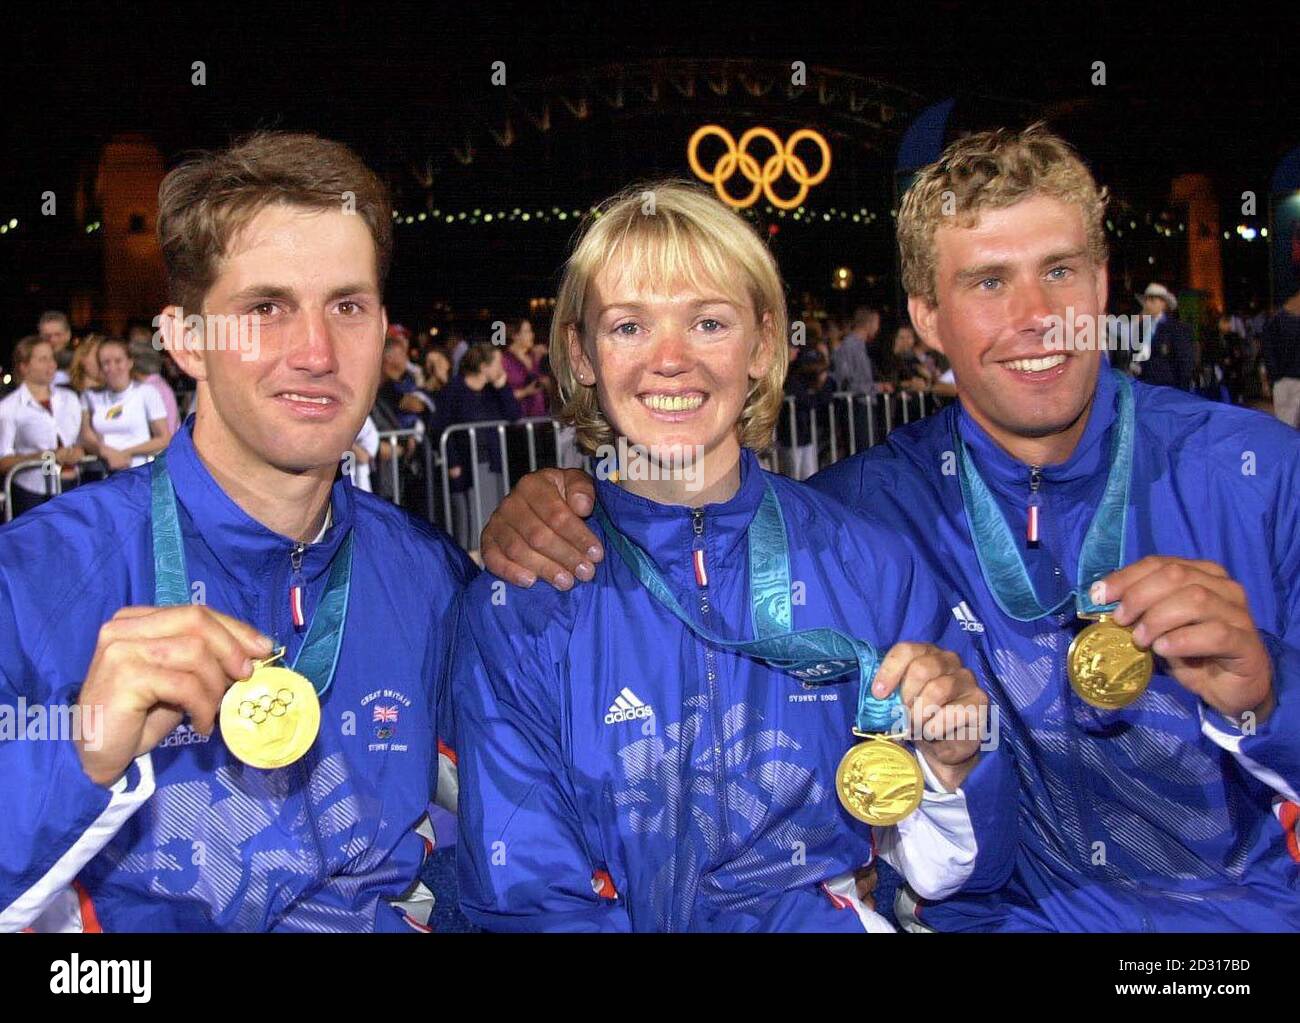 Great Britain's Sailing Gold medallists (L-R) Ben Ainslie, Shirley Robertson and Iain Percy celebrate their Olympic Games success in front of the Harbour Bridge, Sydney, Australia. * Ainslie won the Gold medal in the Men's Laser Class, Robertson in the Women's Europe Class and Percy in the Men's Finn Class. Stock Photo